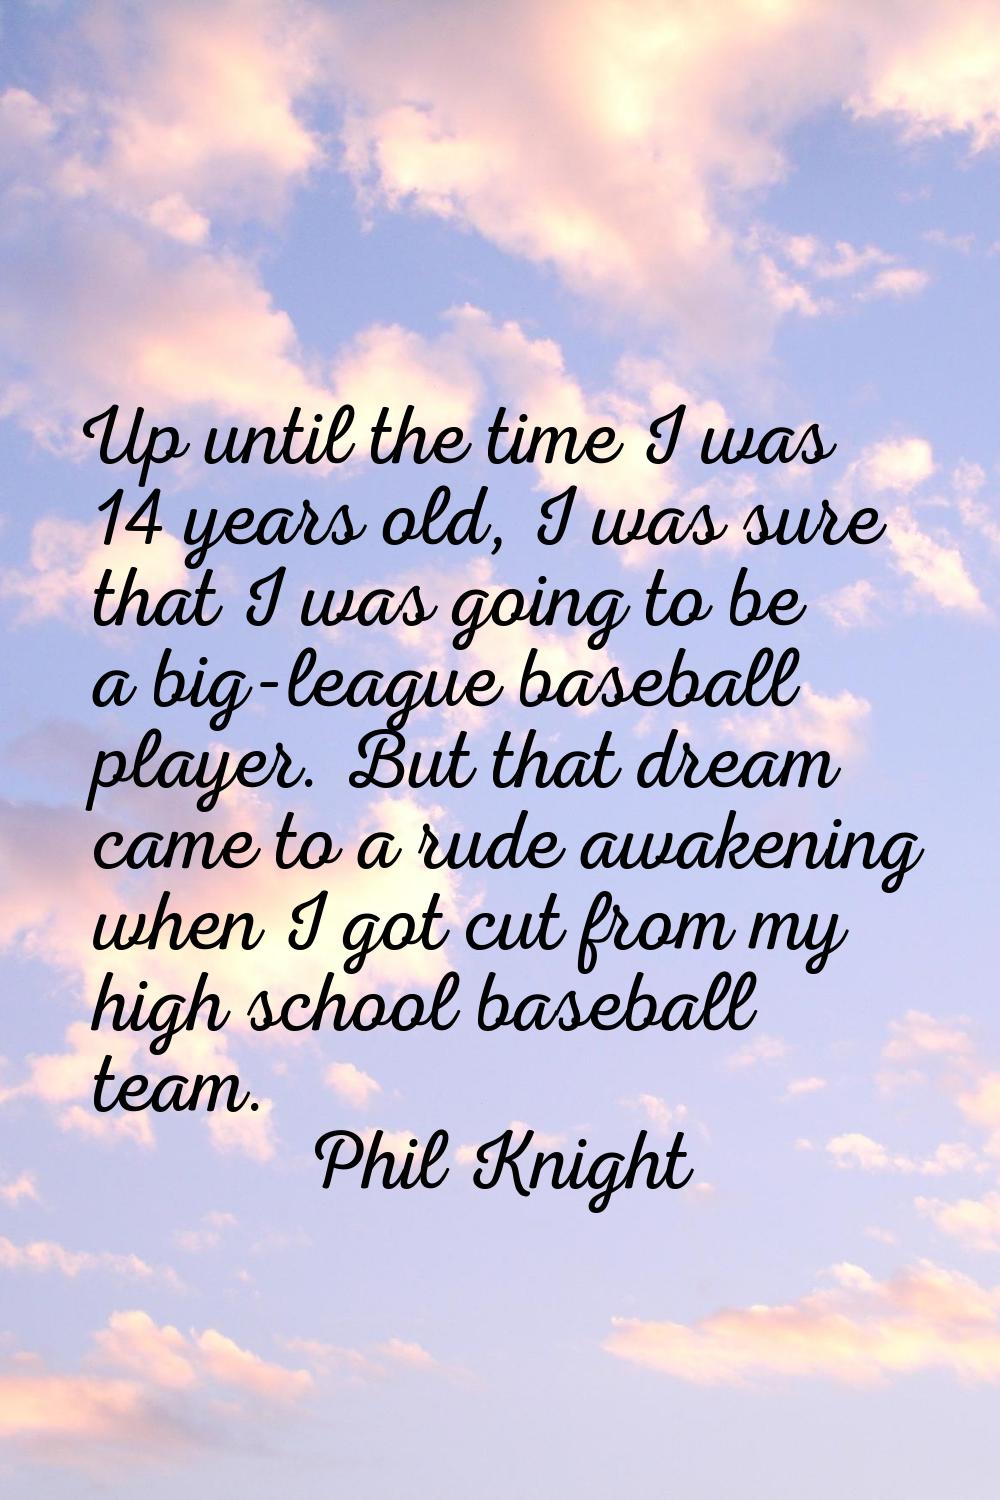 Up until the time I was 14 years old, I was sure that I was going to be a big-league baseball playe